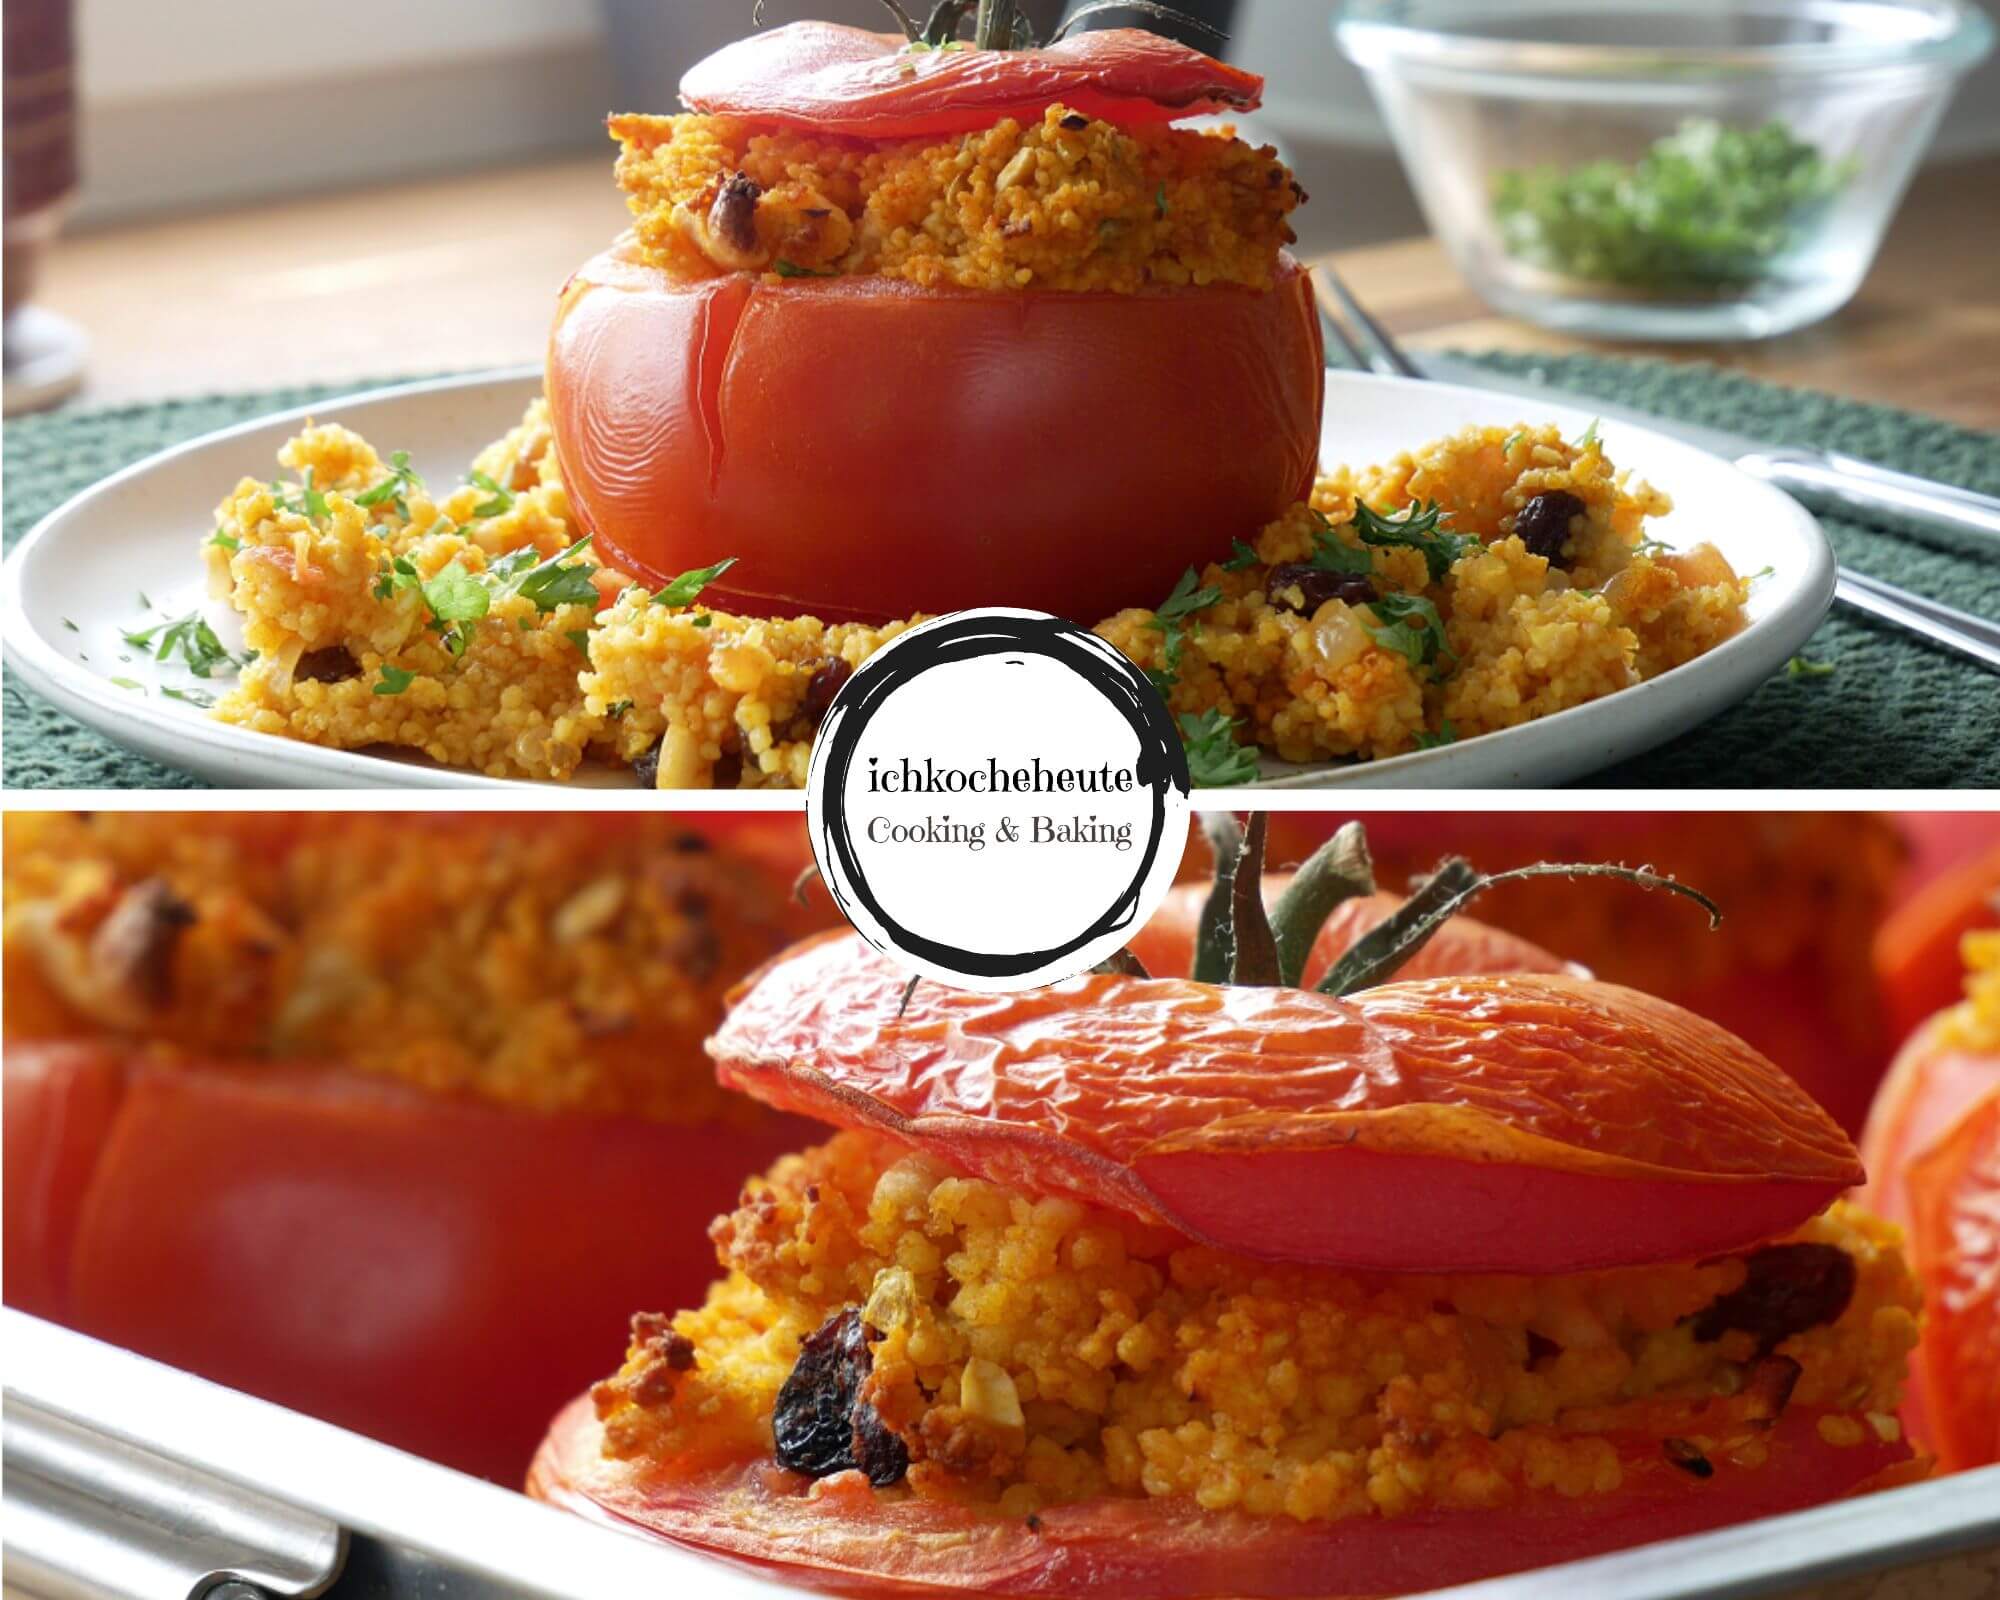 Serving Stuffed Tomatoes with Couscous & Feta